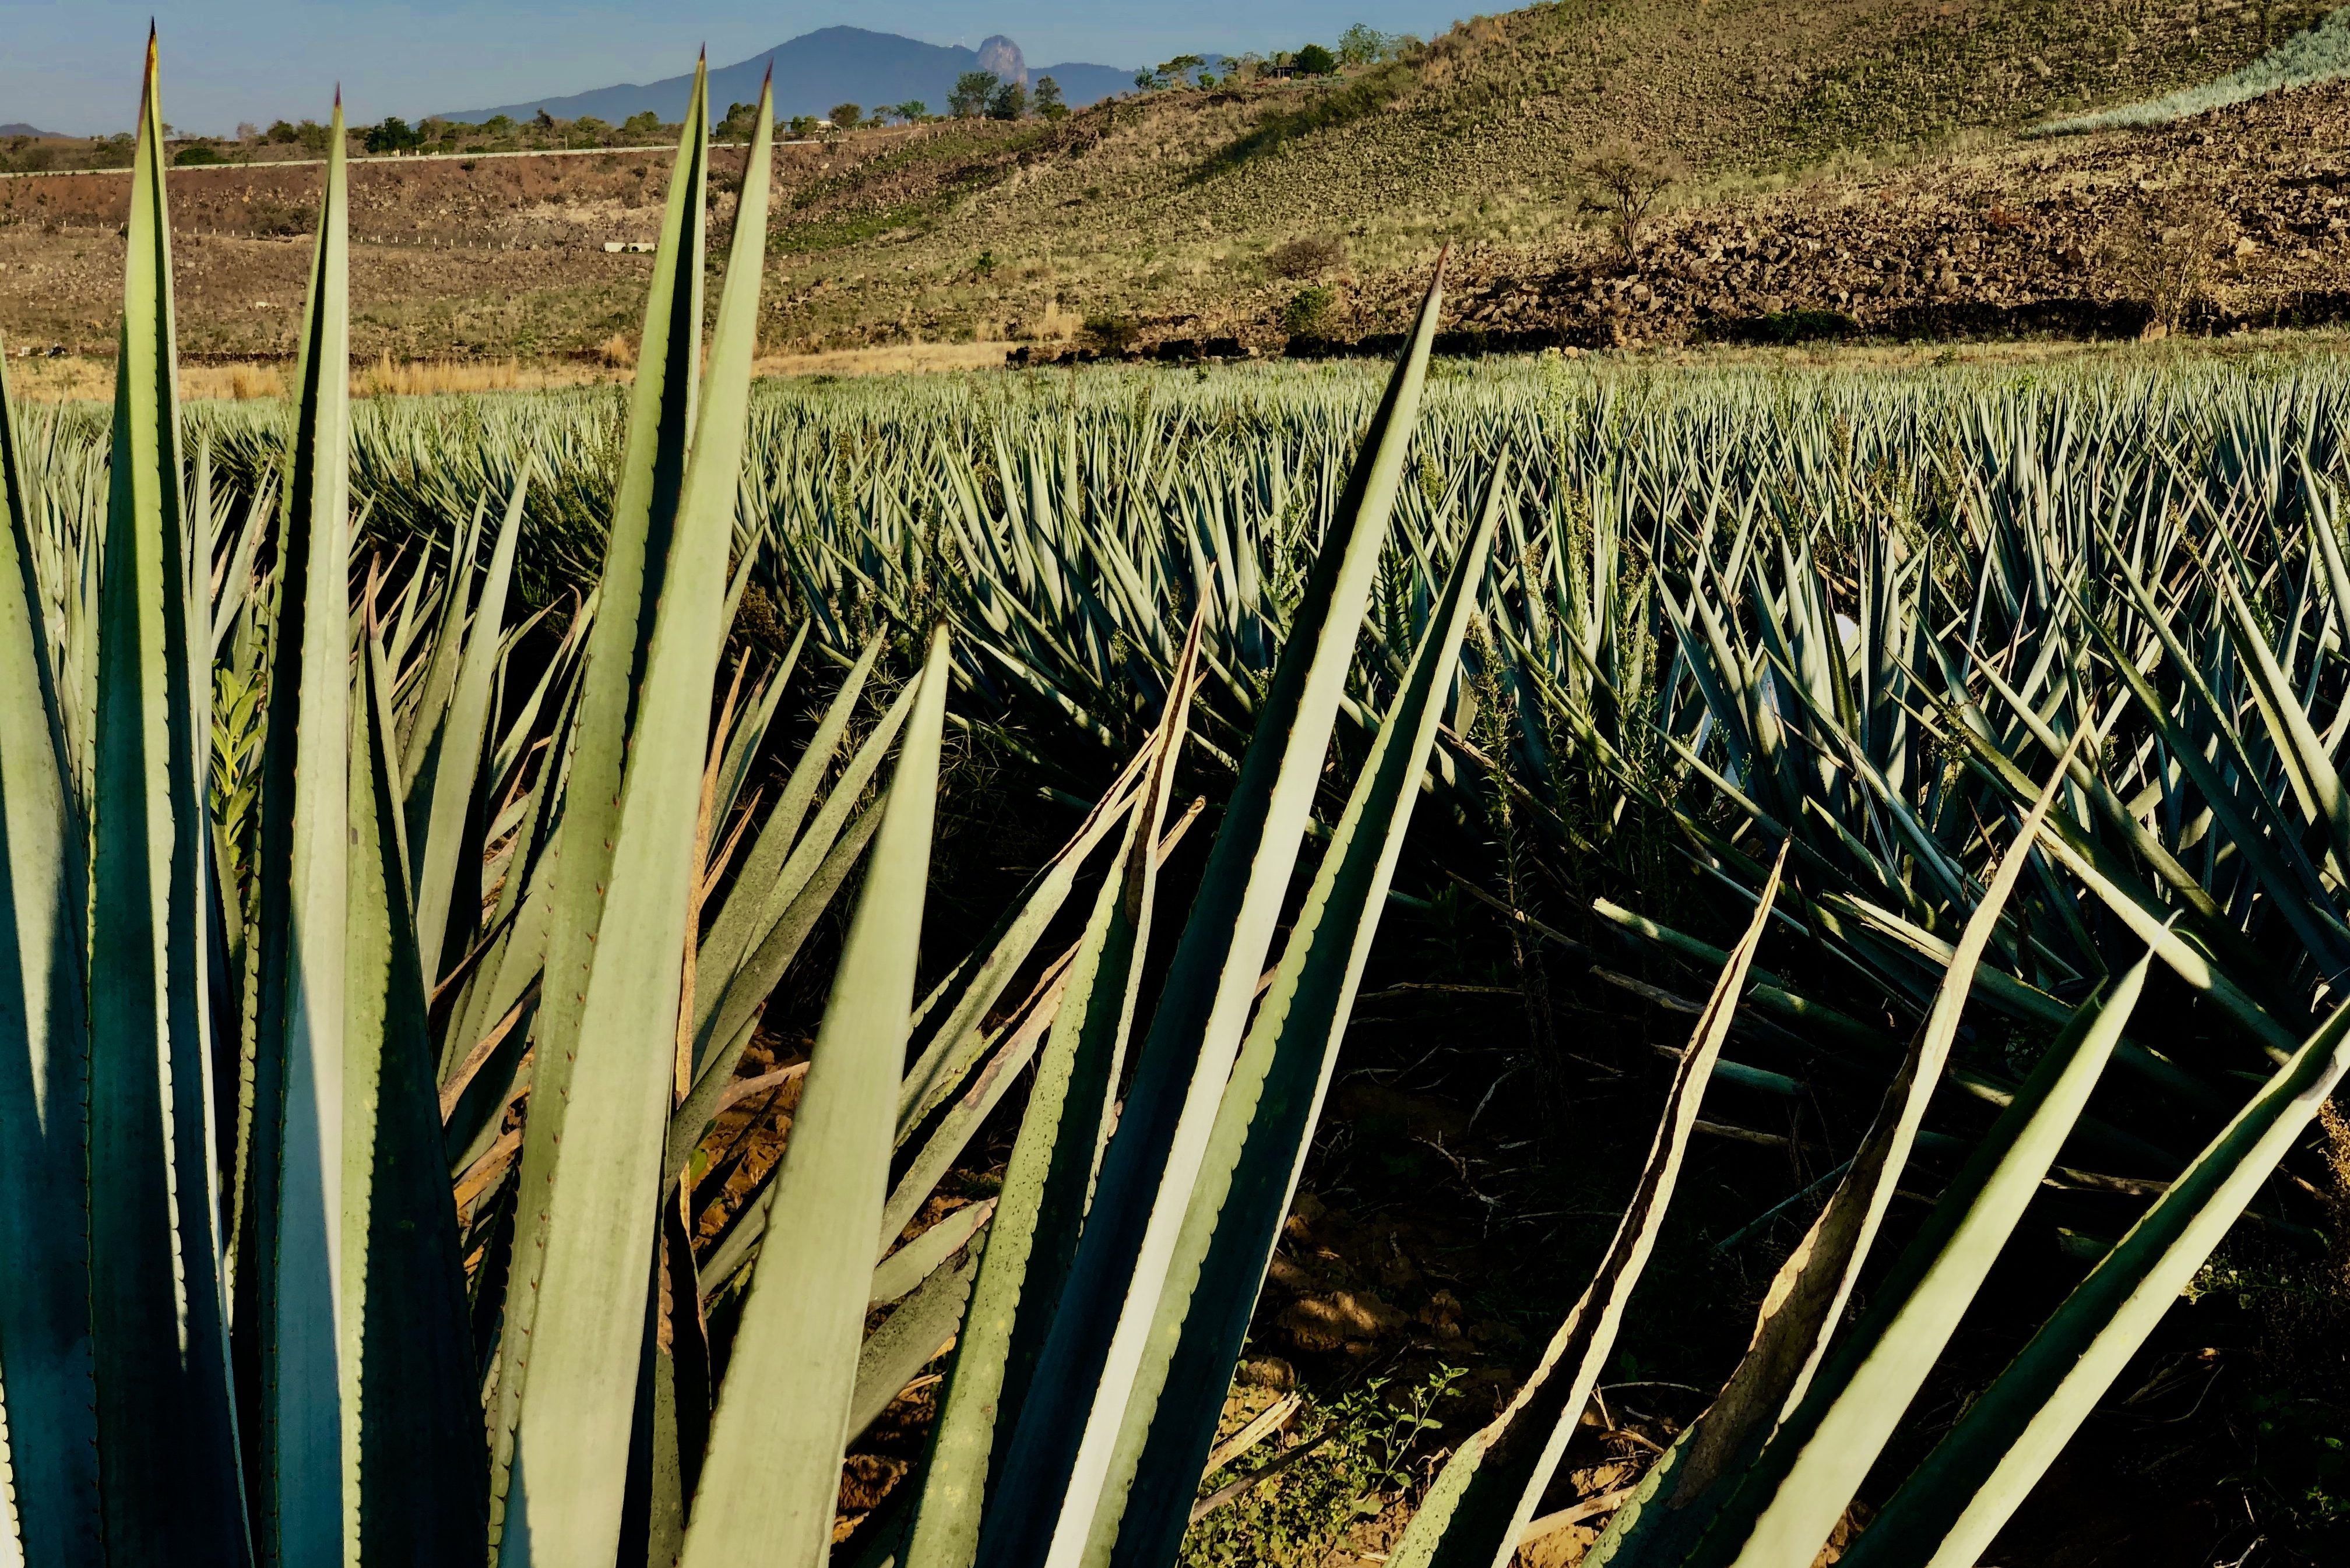 Cincoro's agave comes from the San Miguel el Alto highlands and the El Arenal lowland regions of Jalisco